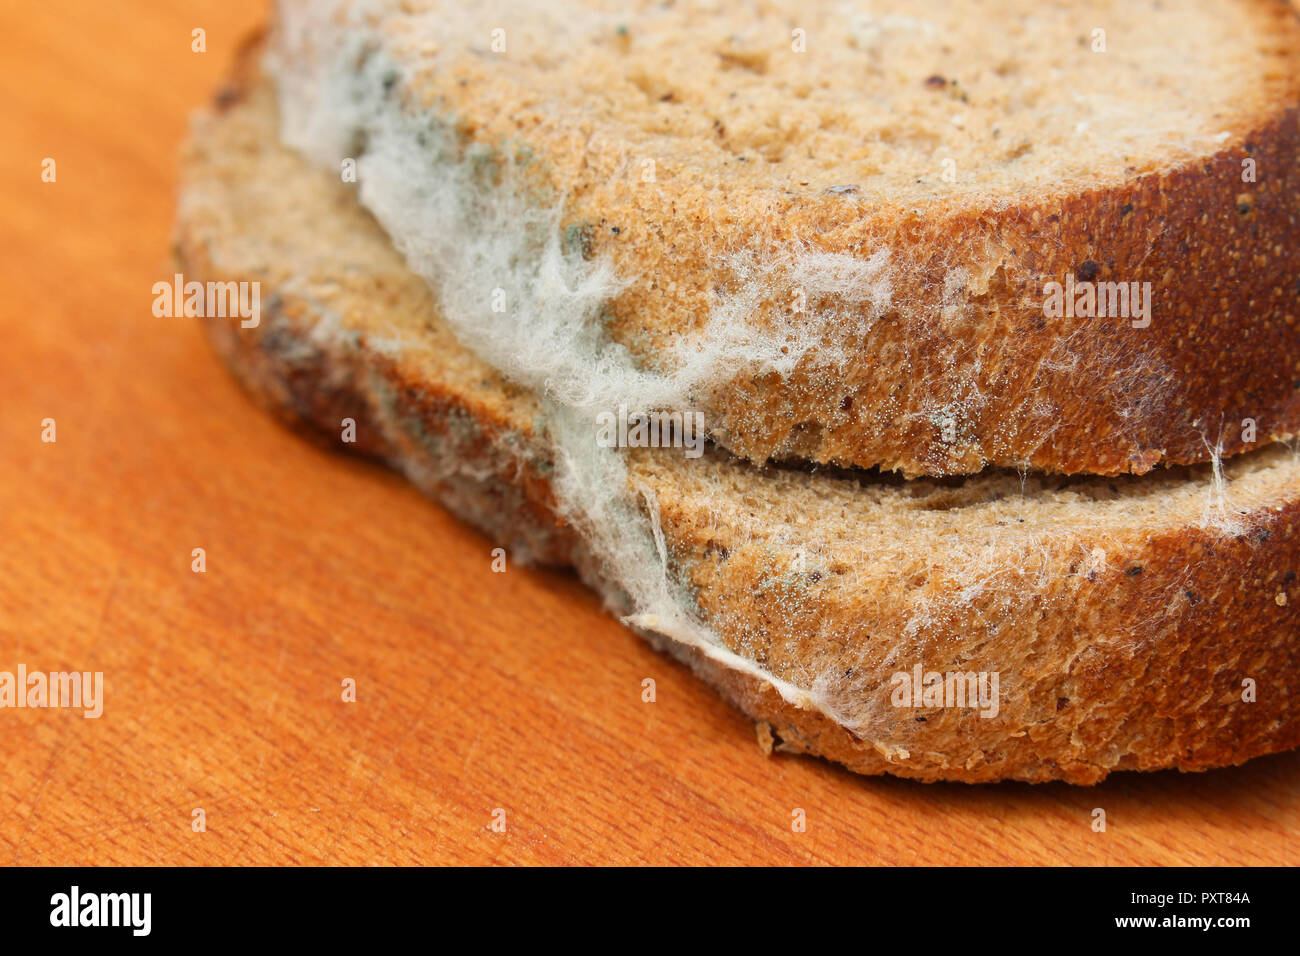 https://c8.alamy.com/comp/PXT84A/the-old-black-mold-on-the-bread-spoiled-food-mold-on-food-PXT84A.jpg